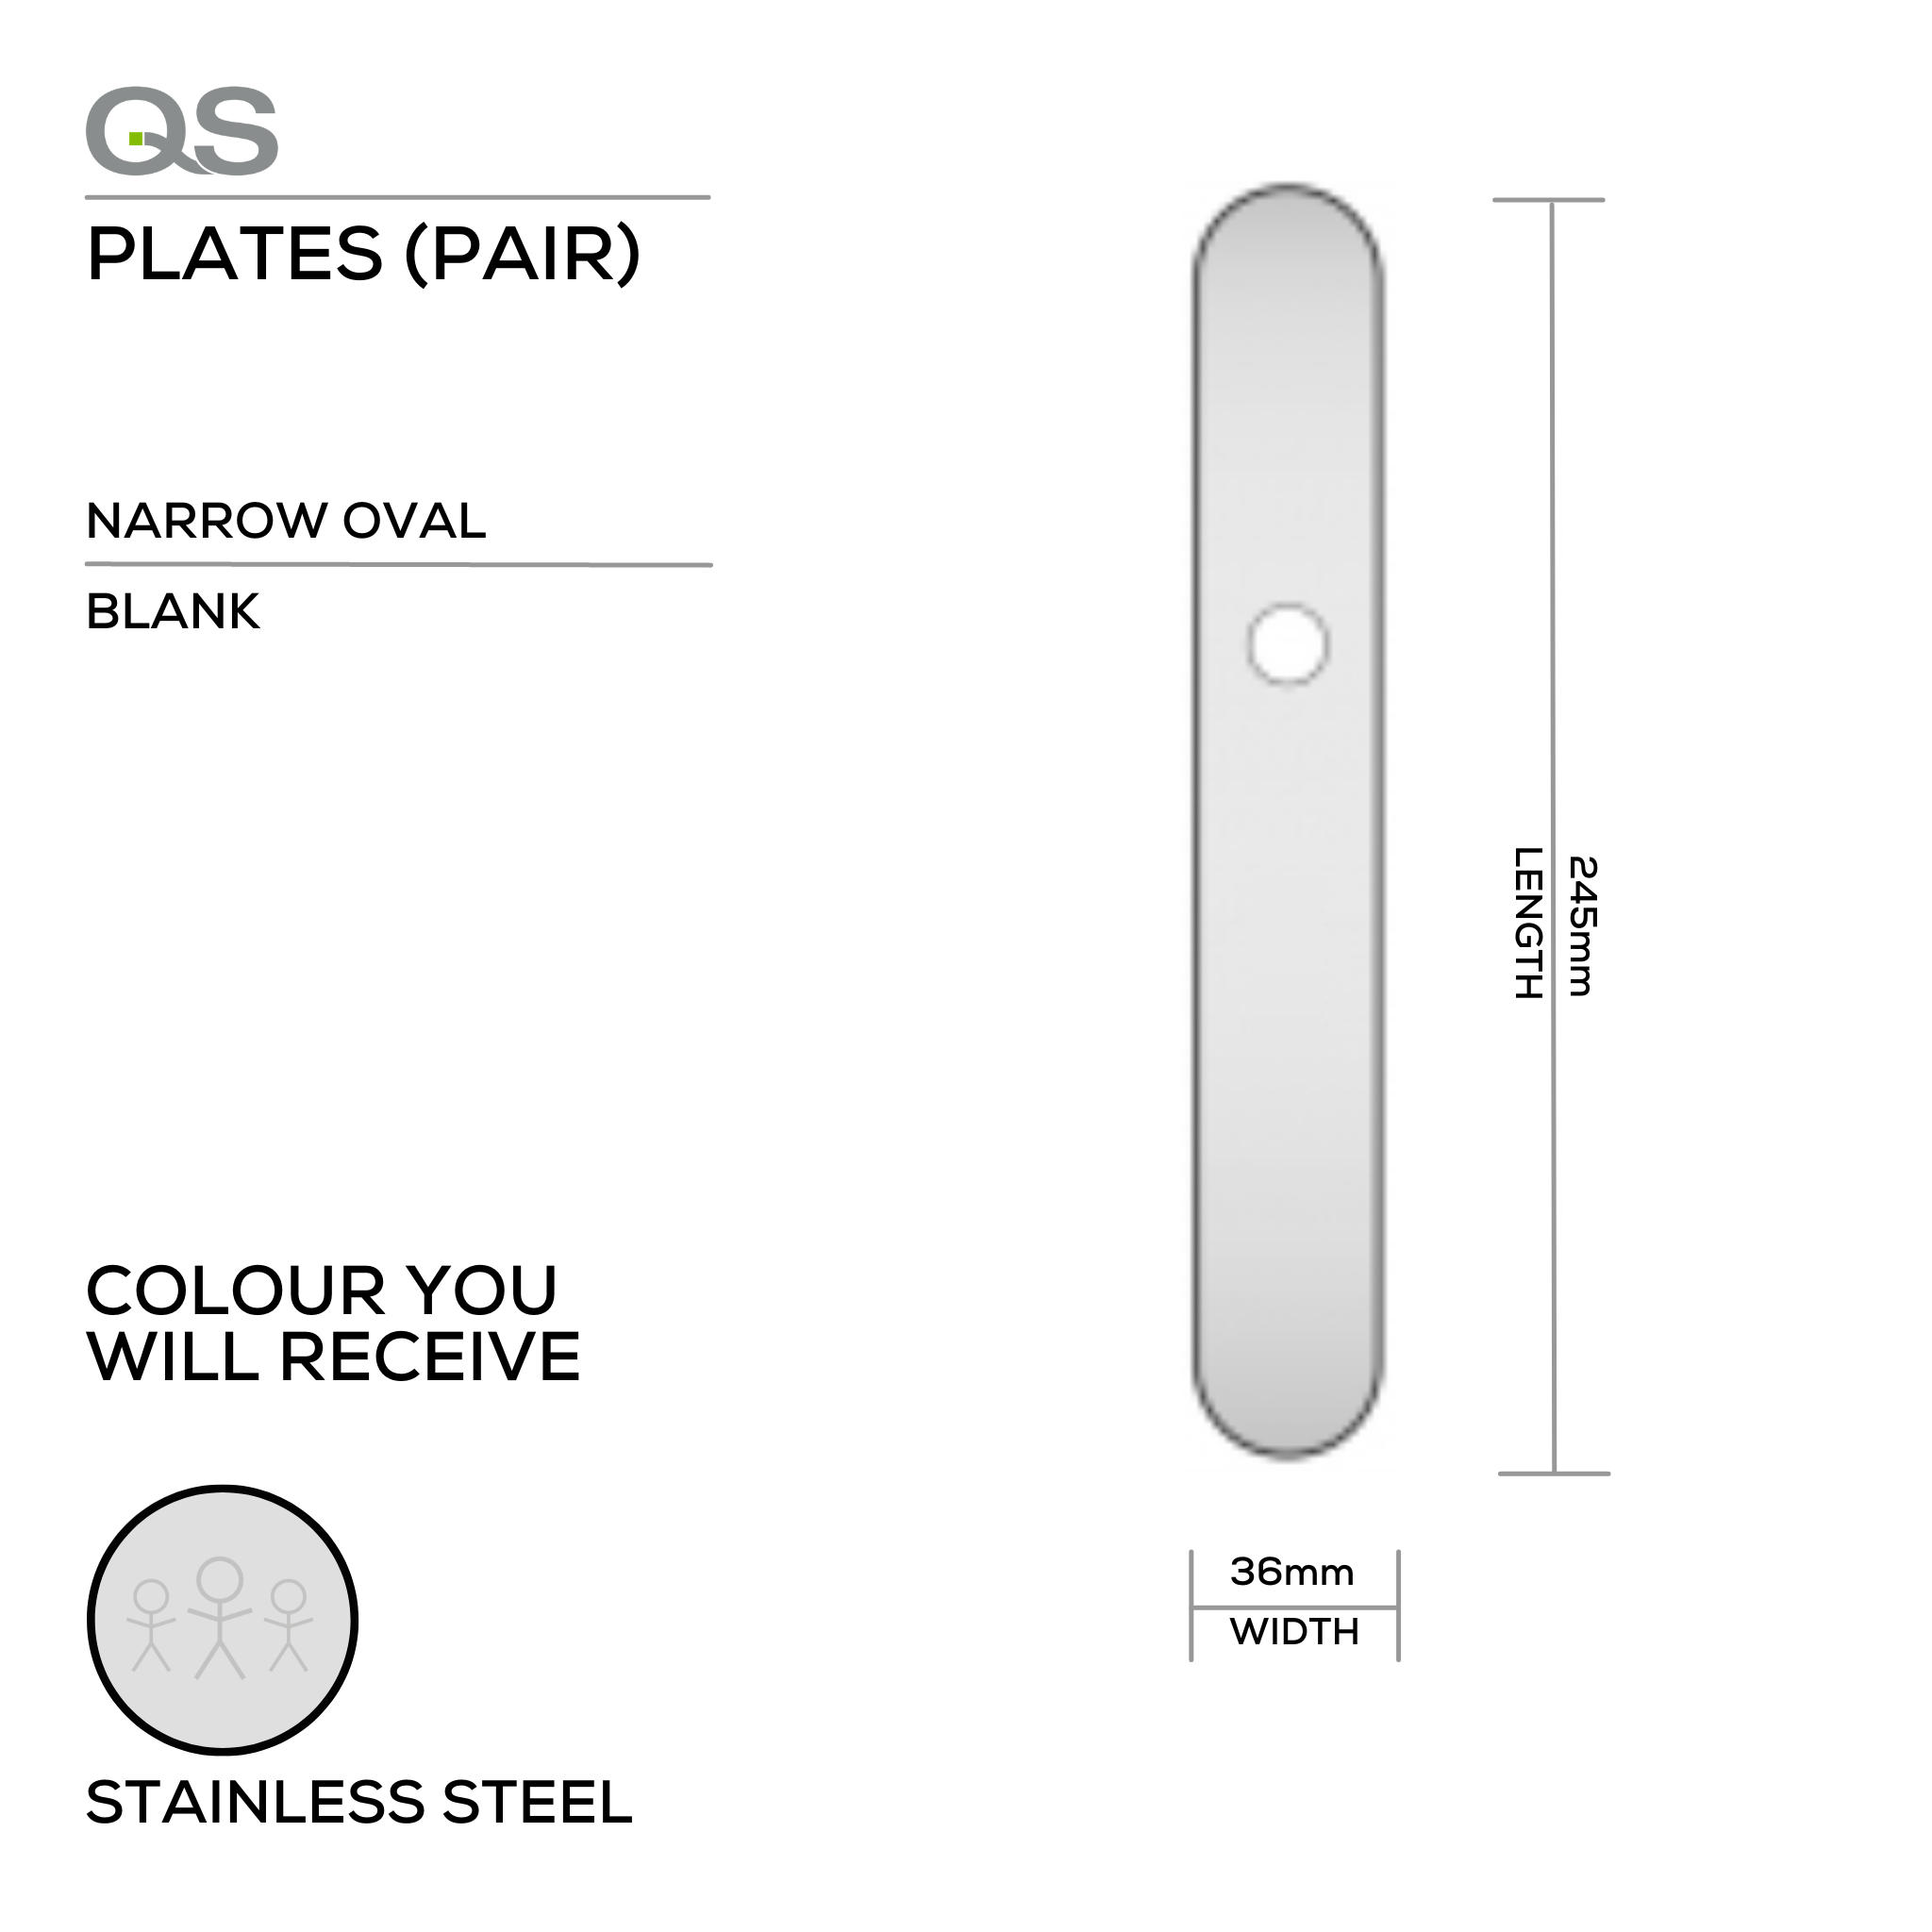 QS4483 BLANK, Plate, Narrow Oval, 245mm (l) x 36mm (w), Supplied with QS Handle, Stainless Steel, QS